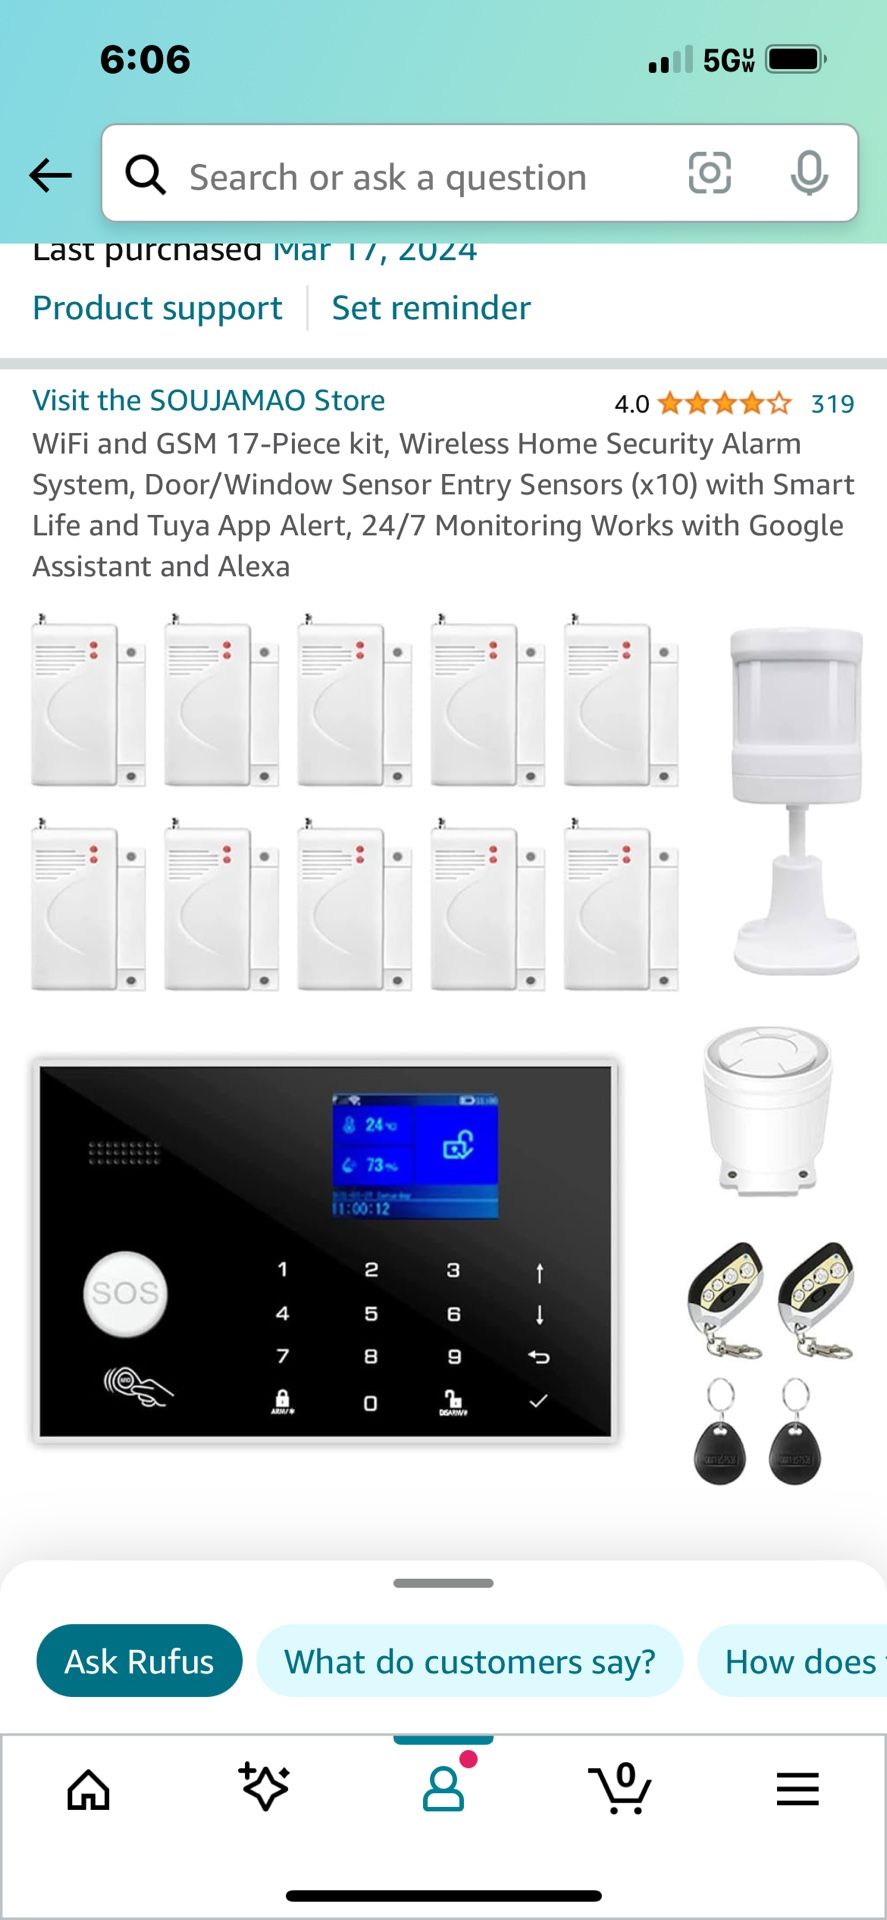 WiFi and GSM 17-Piece kit, Wireless Home Security Alarm System, Door/Window Sensor Entry Sensors (x10) with Smart Life and Tuya App Alert, 24/7 Monito